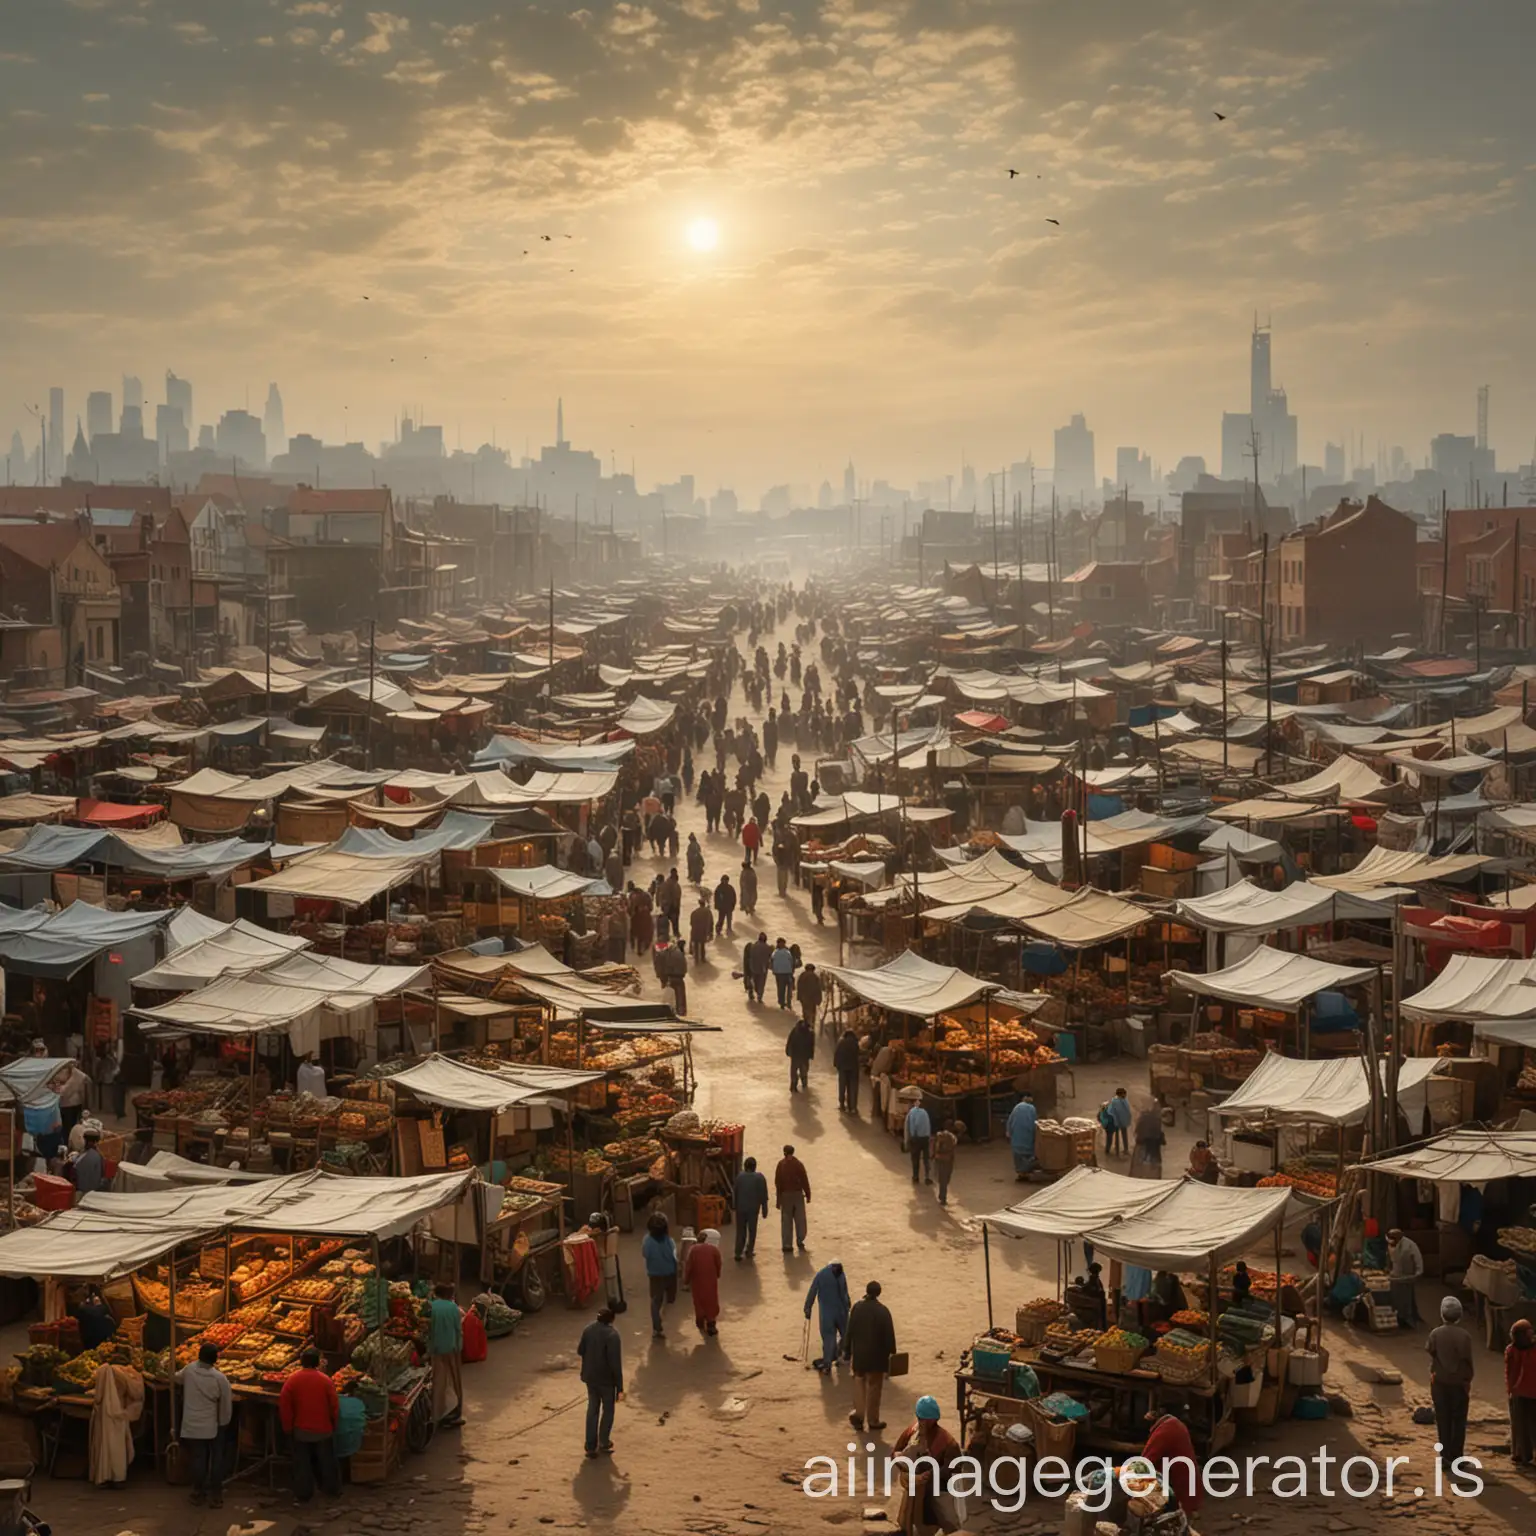 Vibrant-Market-Landscape-with-Colorful-Stalls-and-Bustling-Crowds